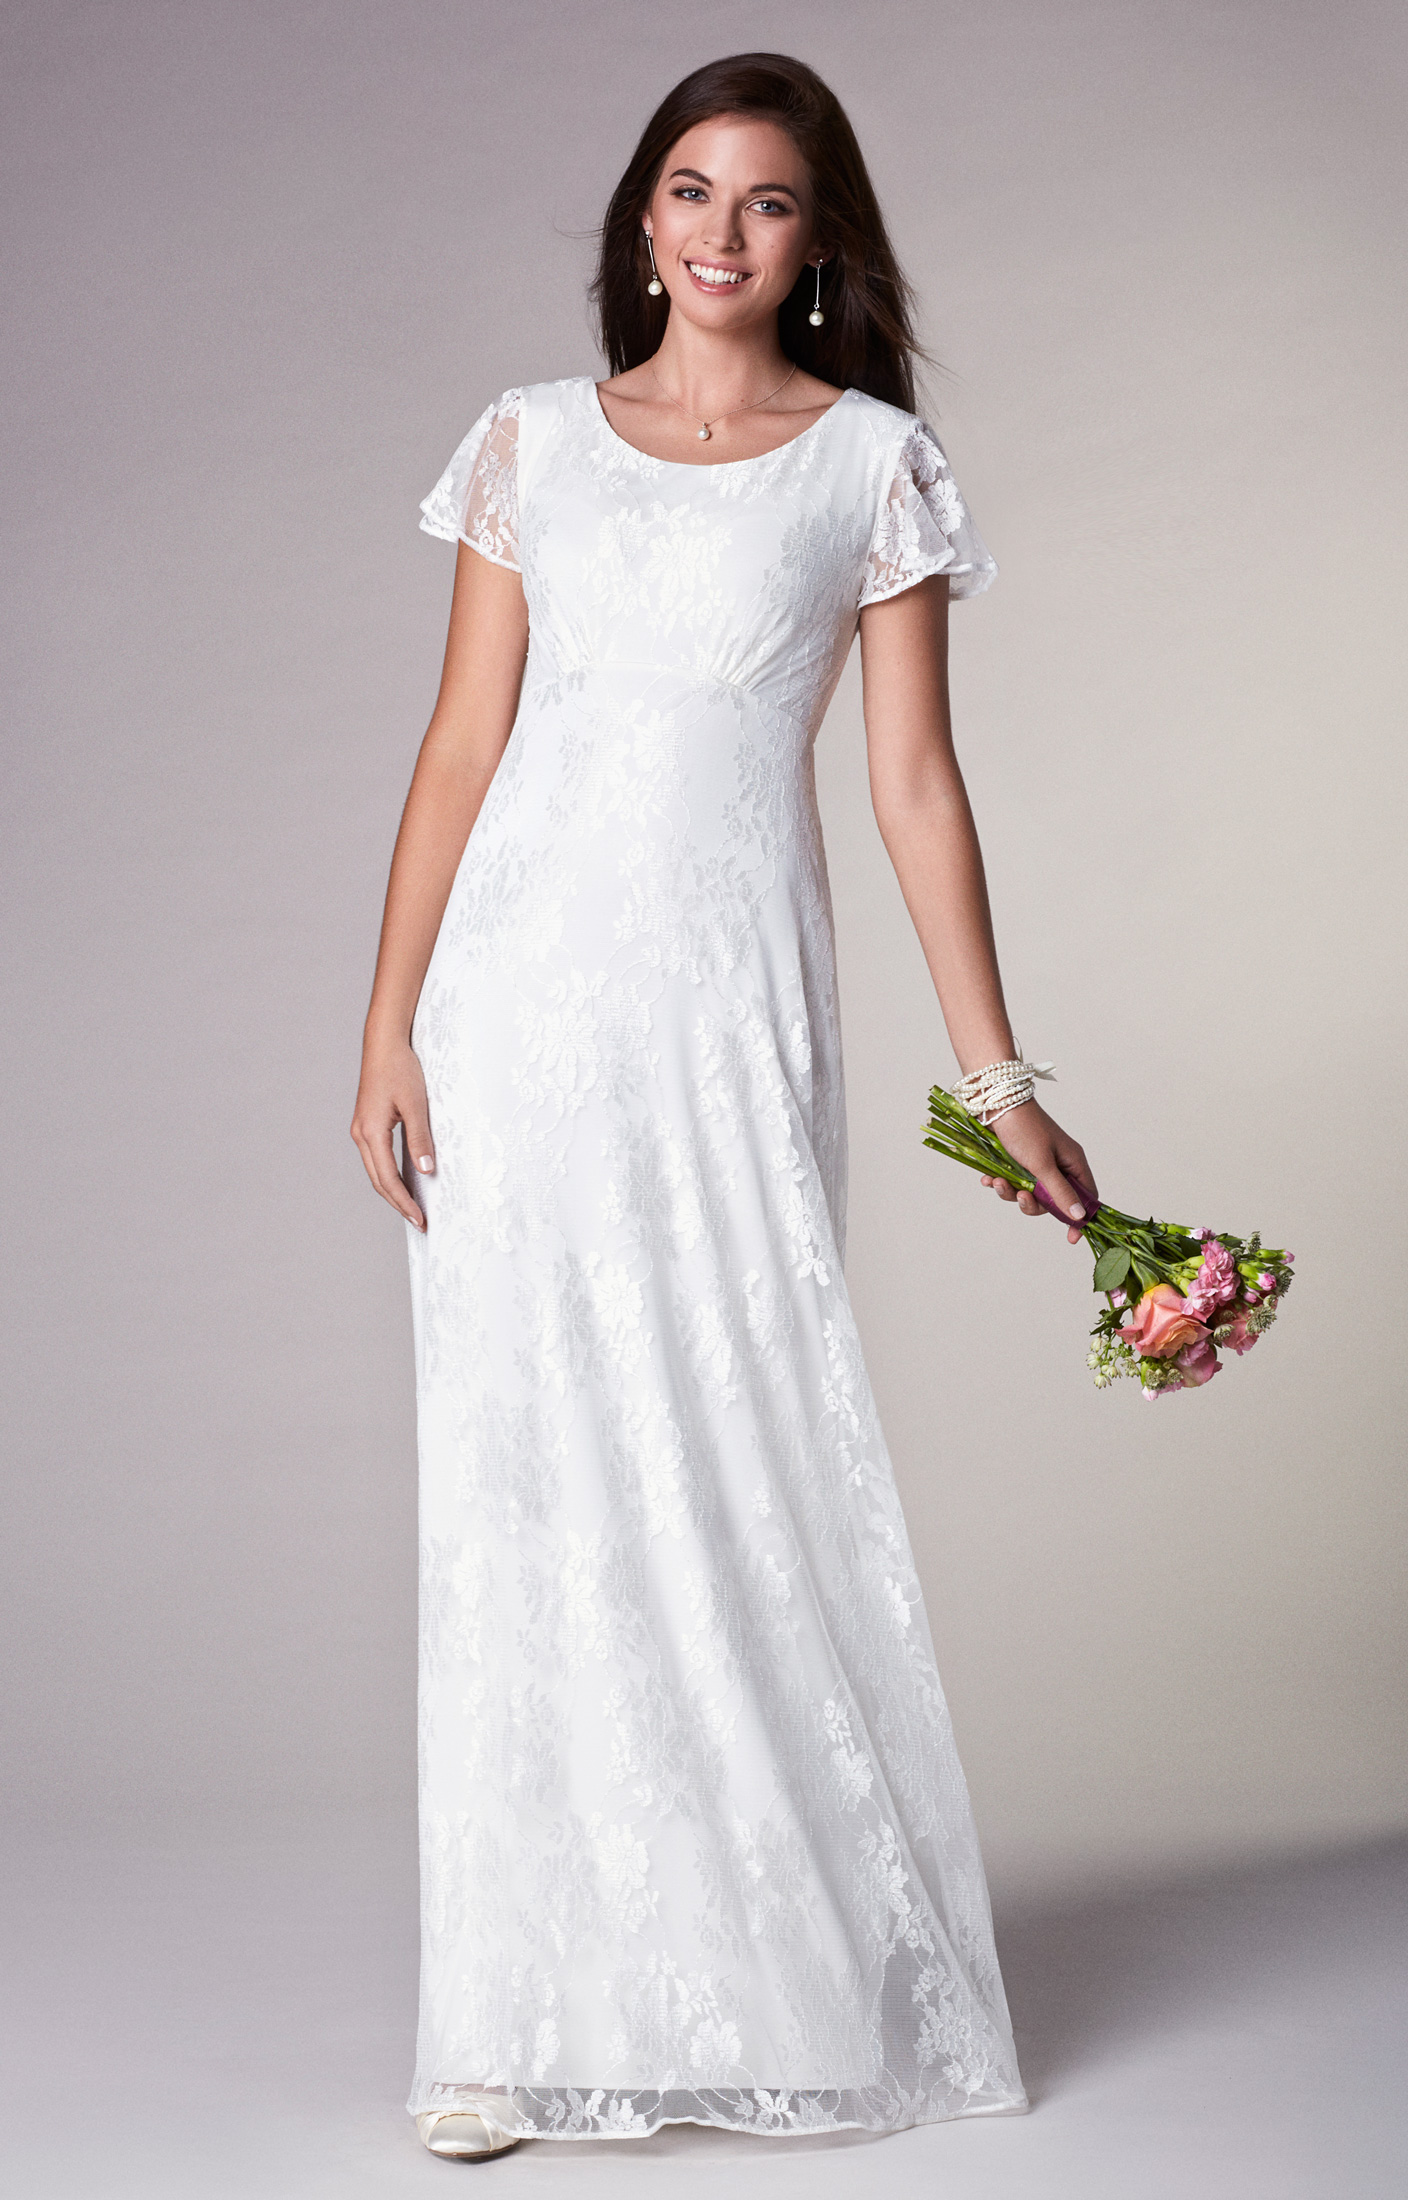 Best Wedding Night Dress  The ultimate guide 